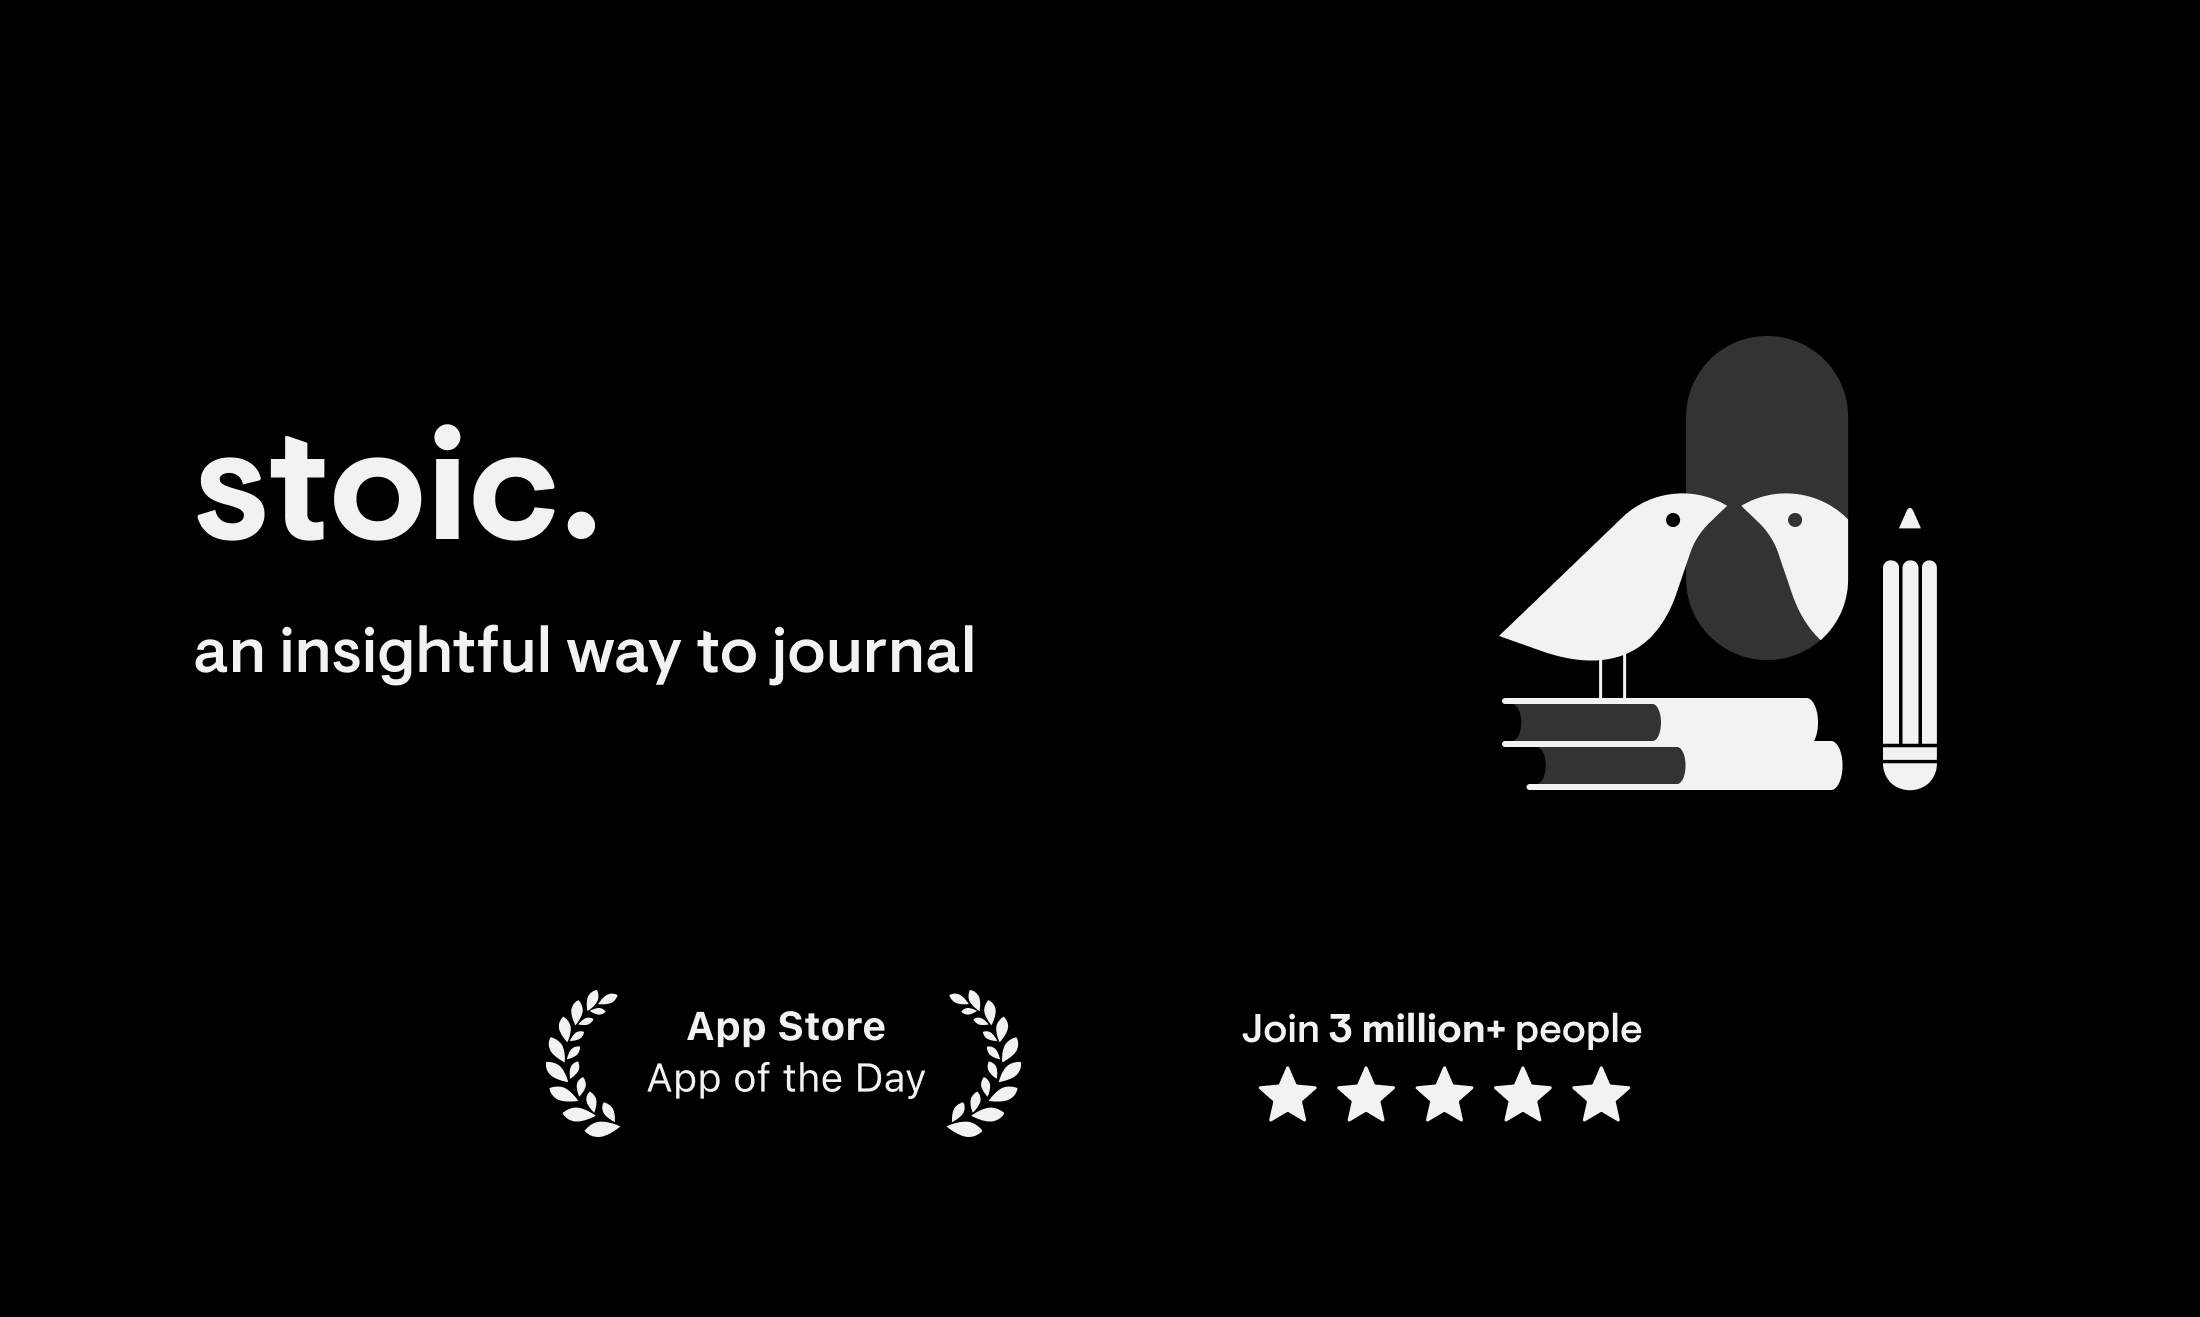 stoic-5 - The all-in-one journaling app, now with AI reflections